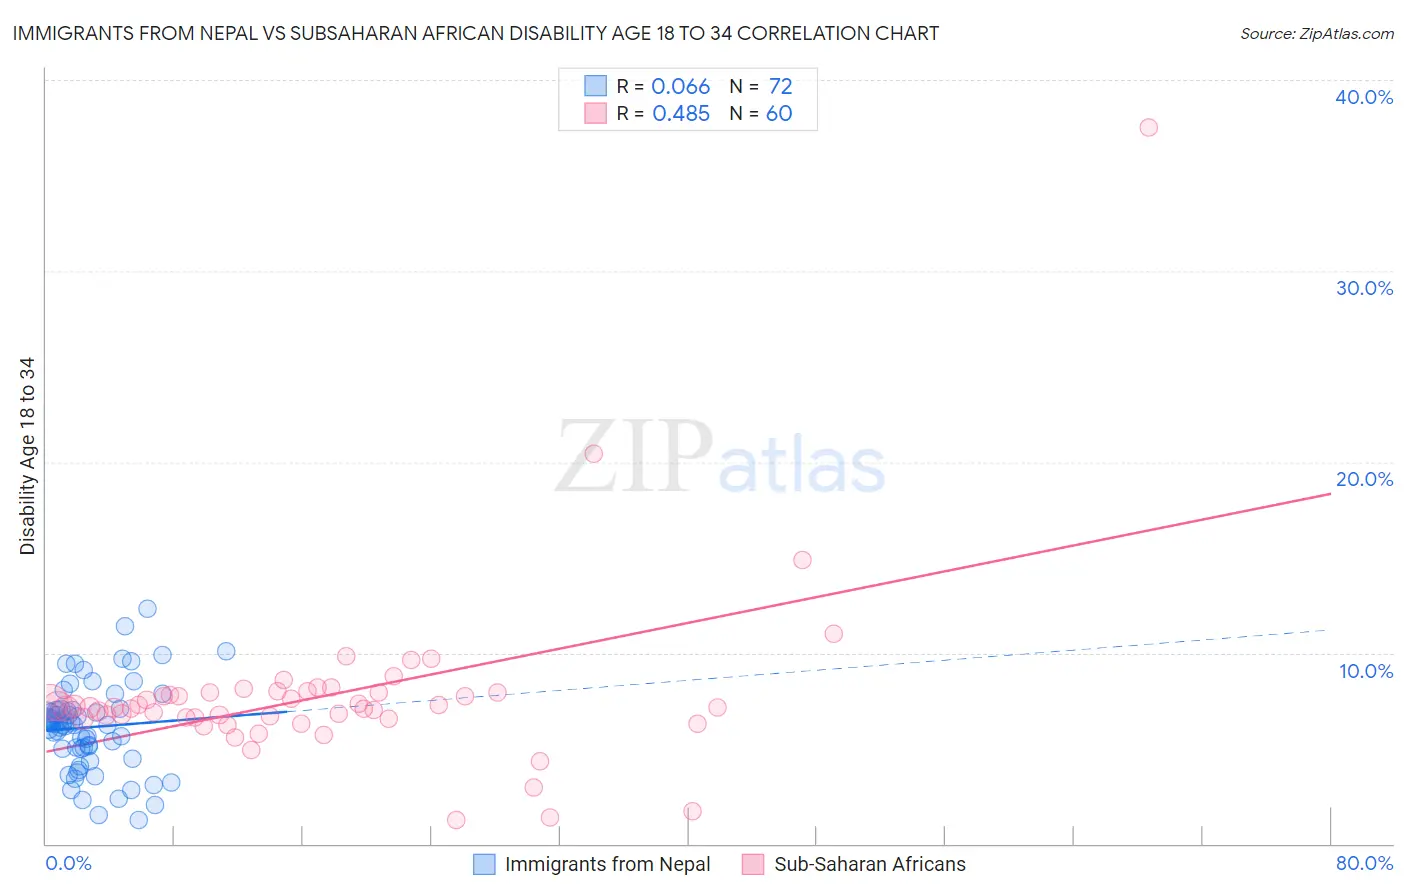 Immigrants from Nepal vs Subsaharan African Disability Age 18 to 34